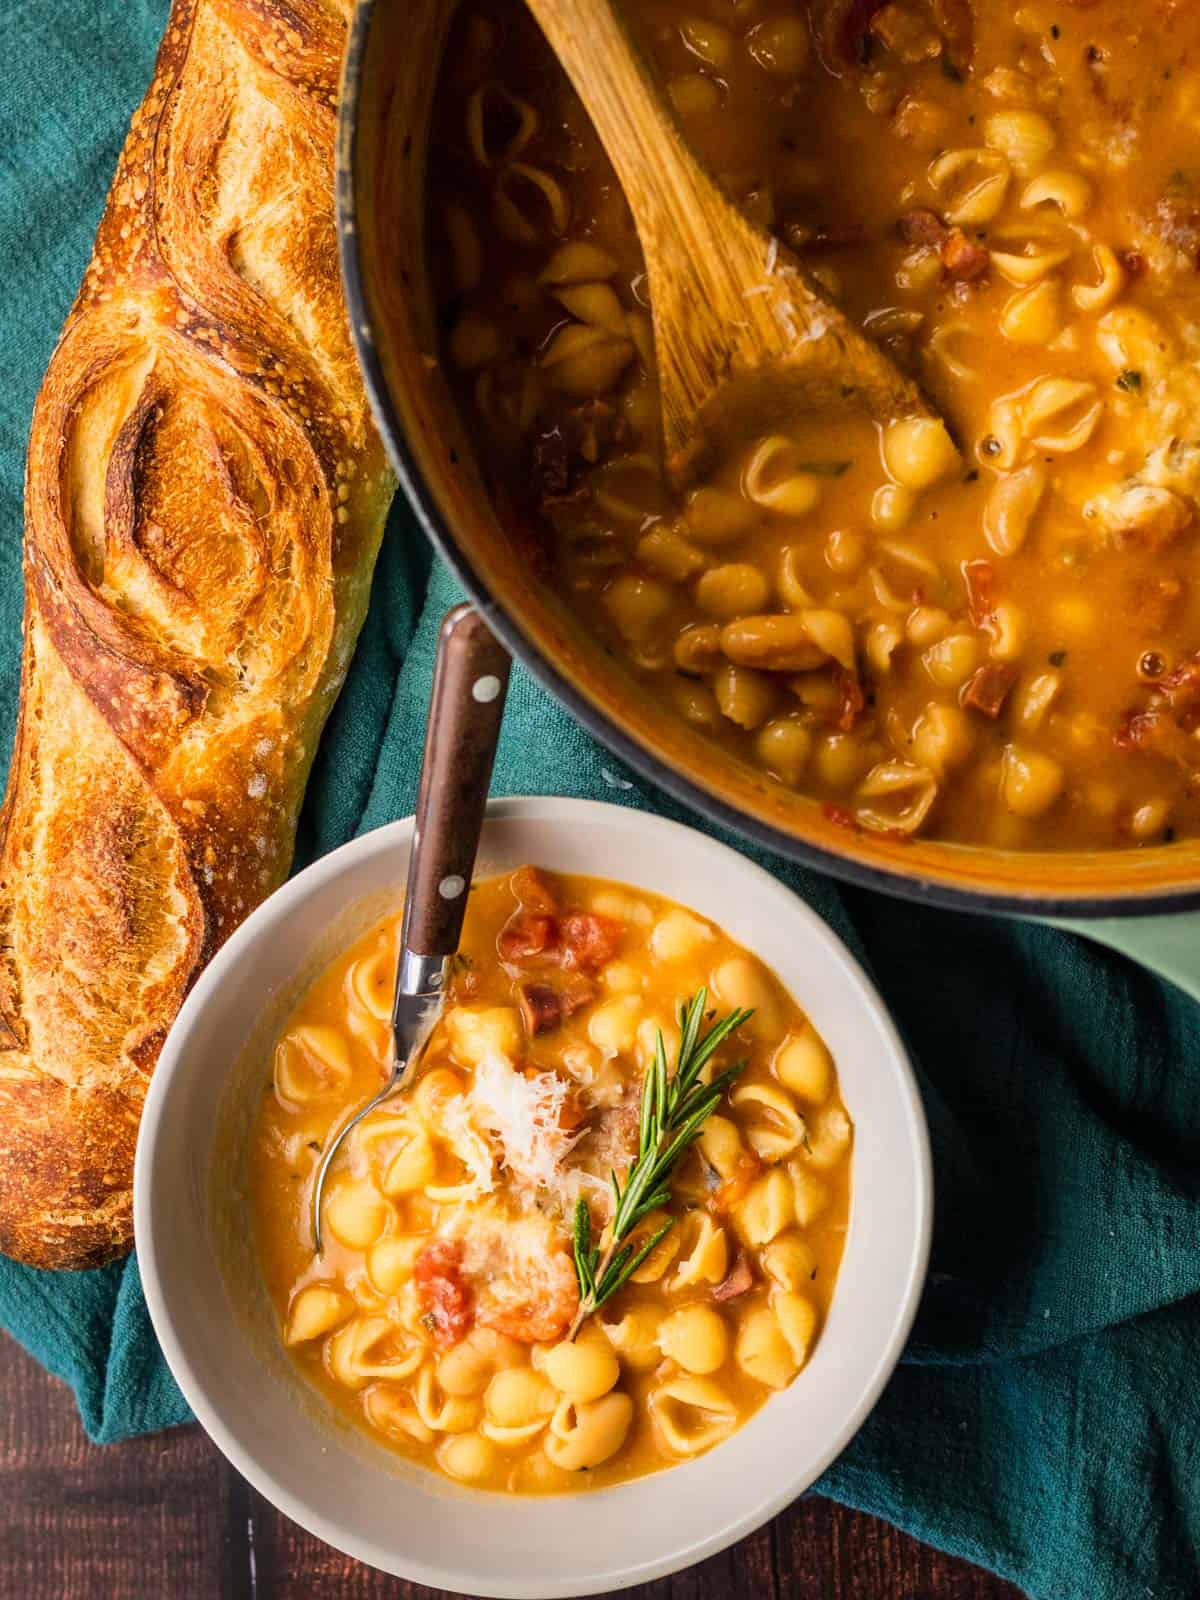 dutch oven pot and bowl of pasta fagioli with a loaf of bread next to it.